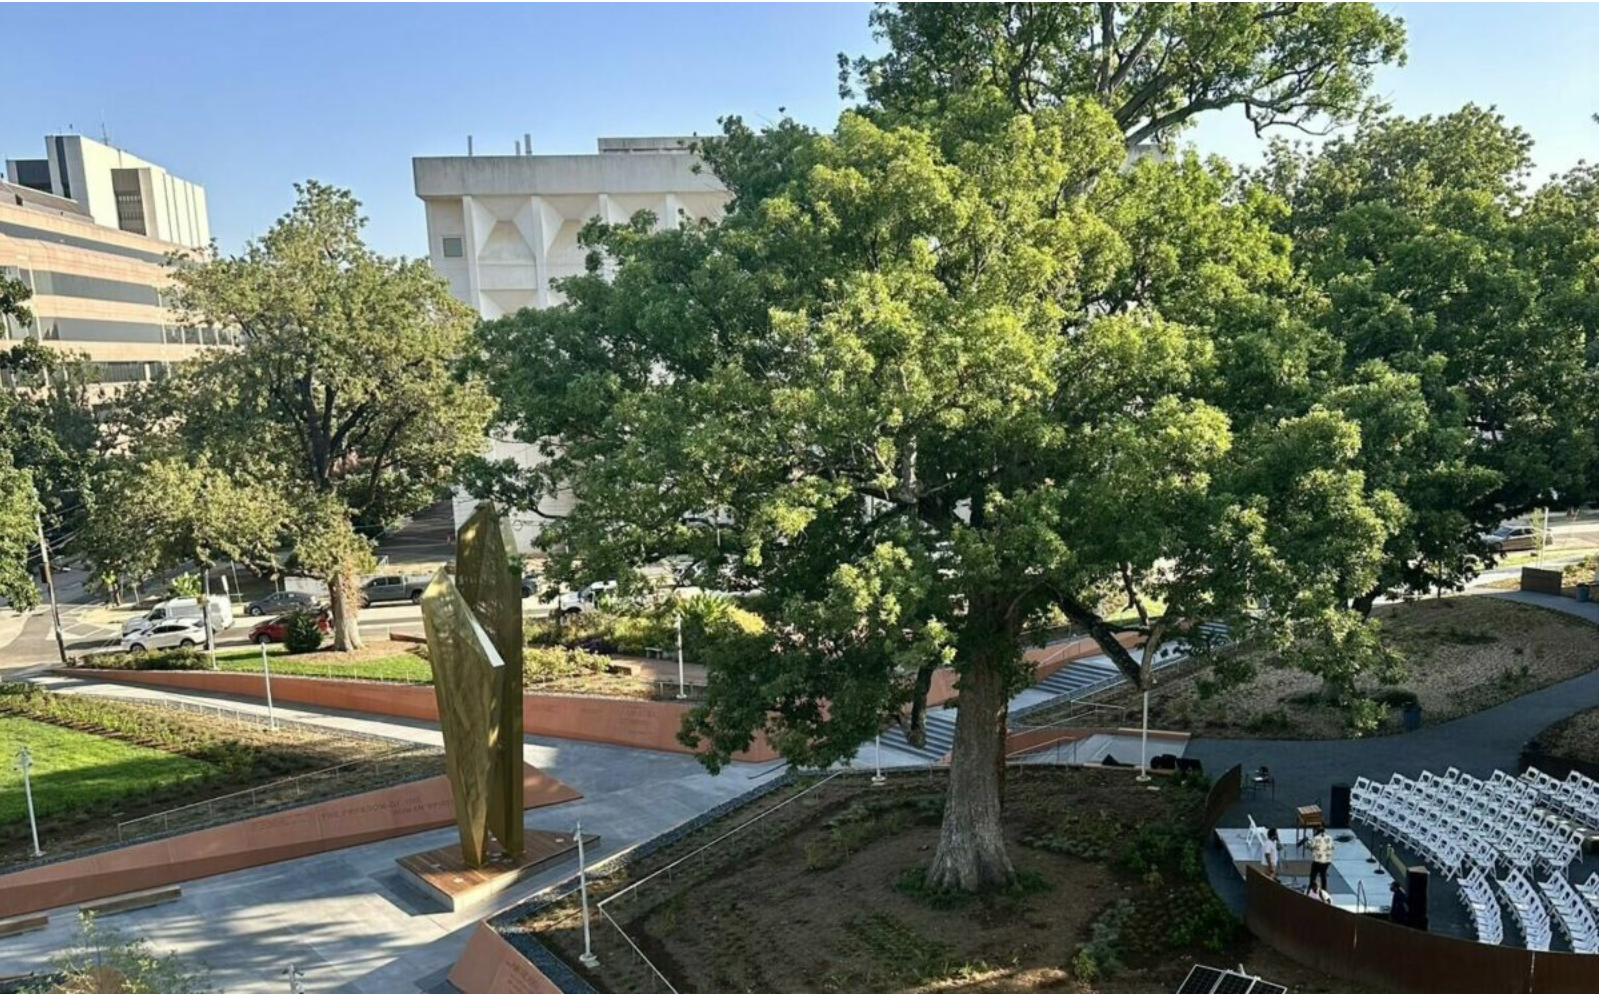 This image of Freedom Park in downtown Raleigh made available from the park's official social media.